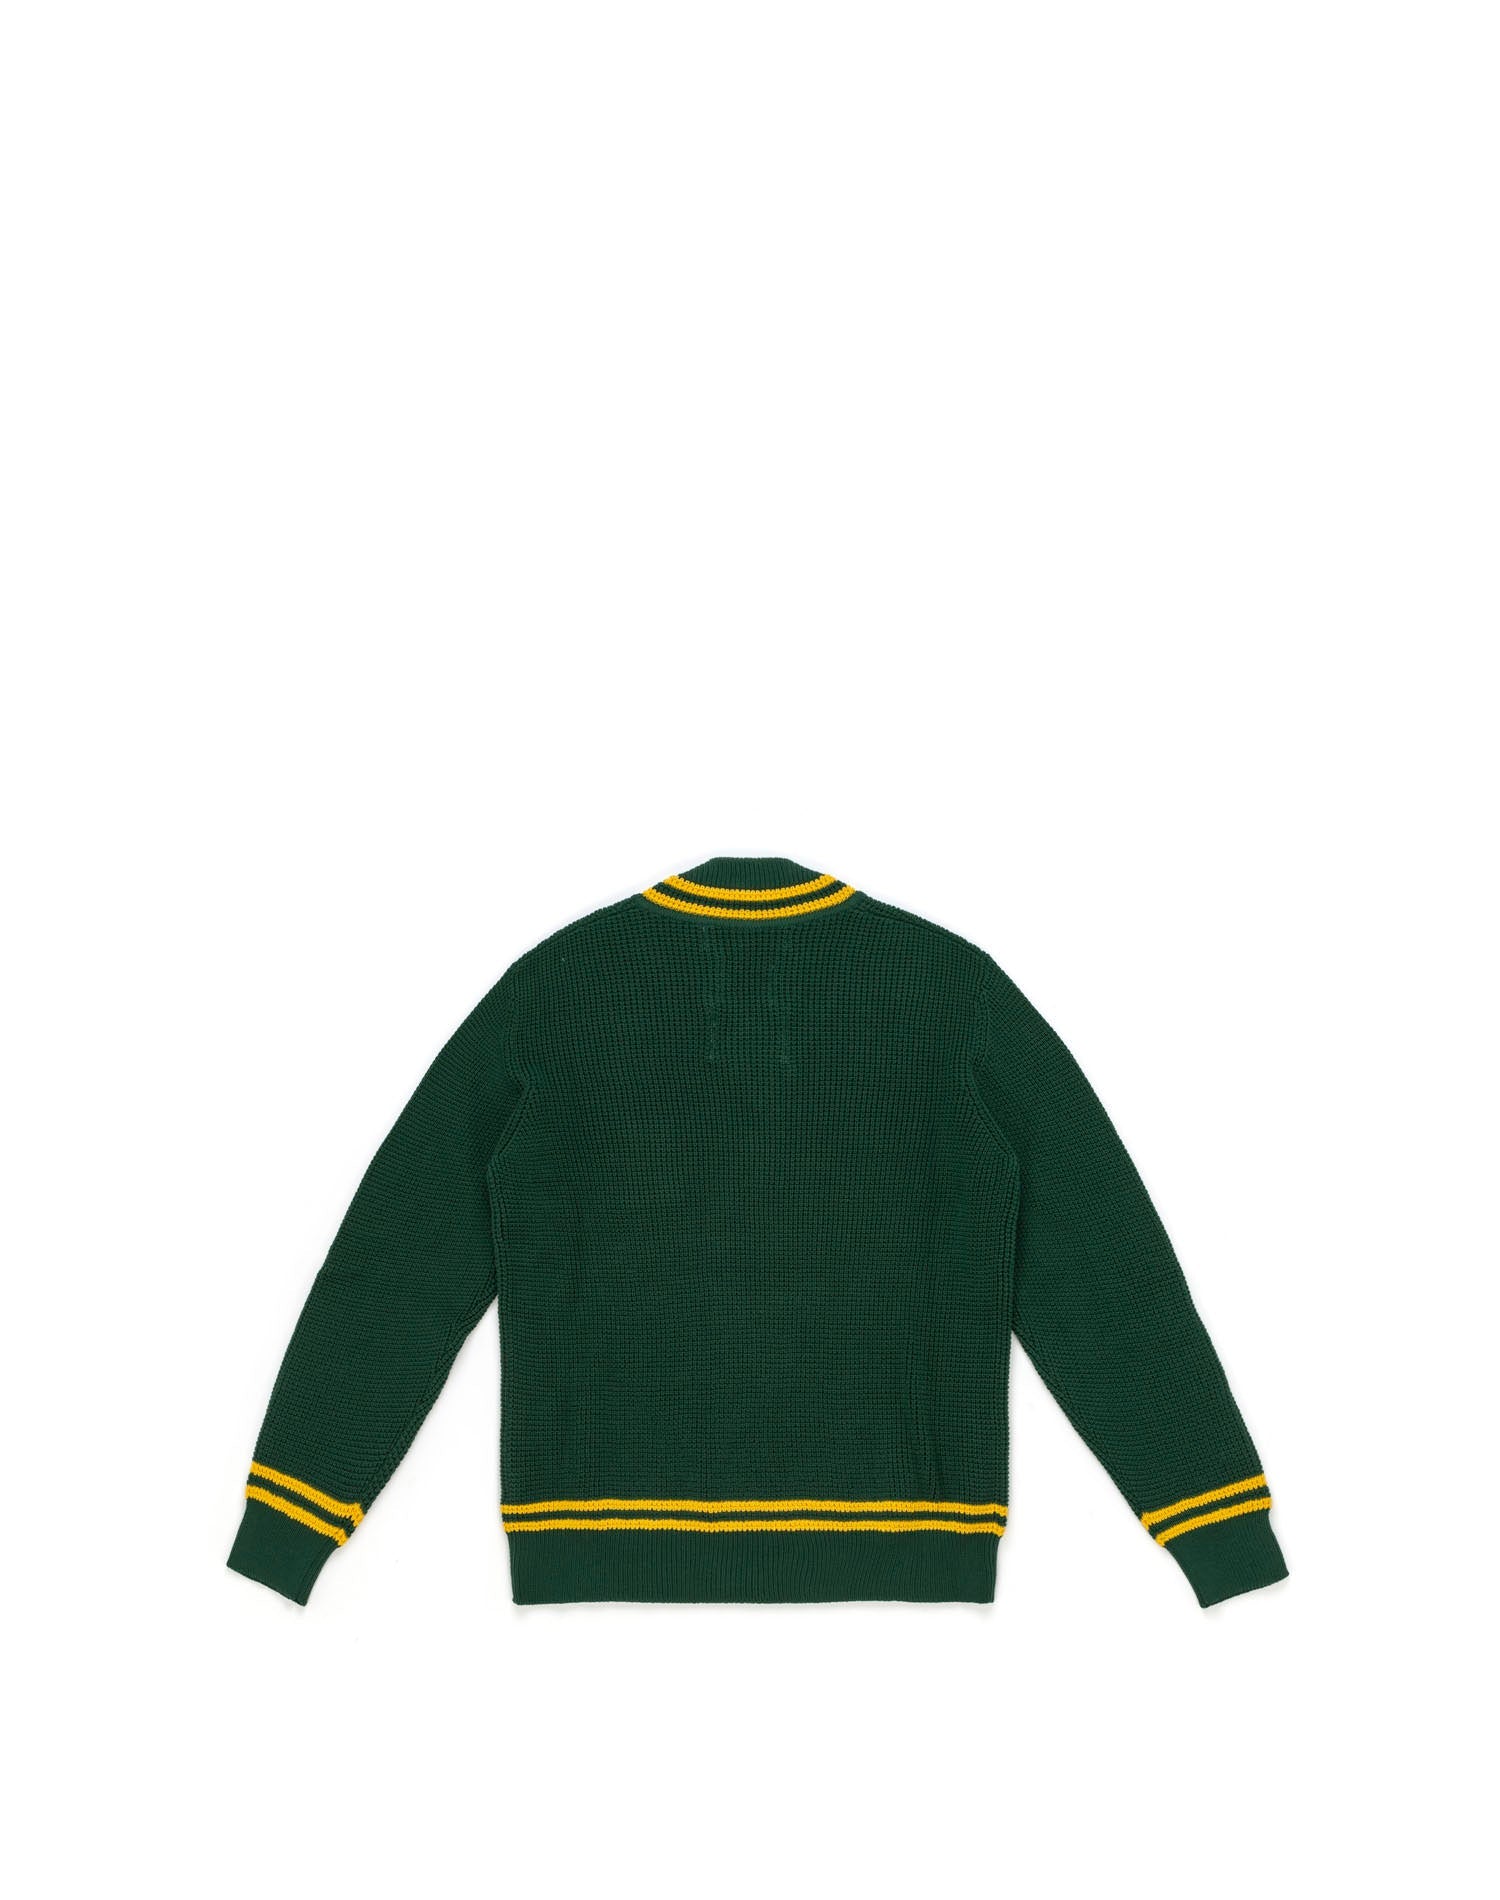 VISITOR Green sweater with front logo patch. Composition: 100% Cotton HTC LOS ANGELES